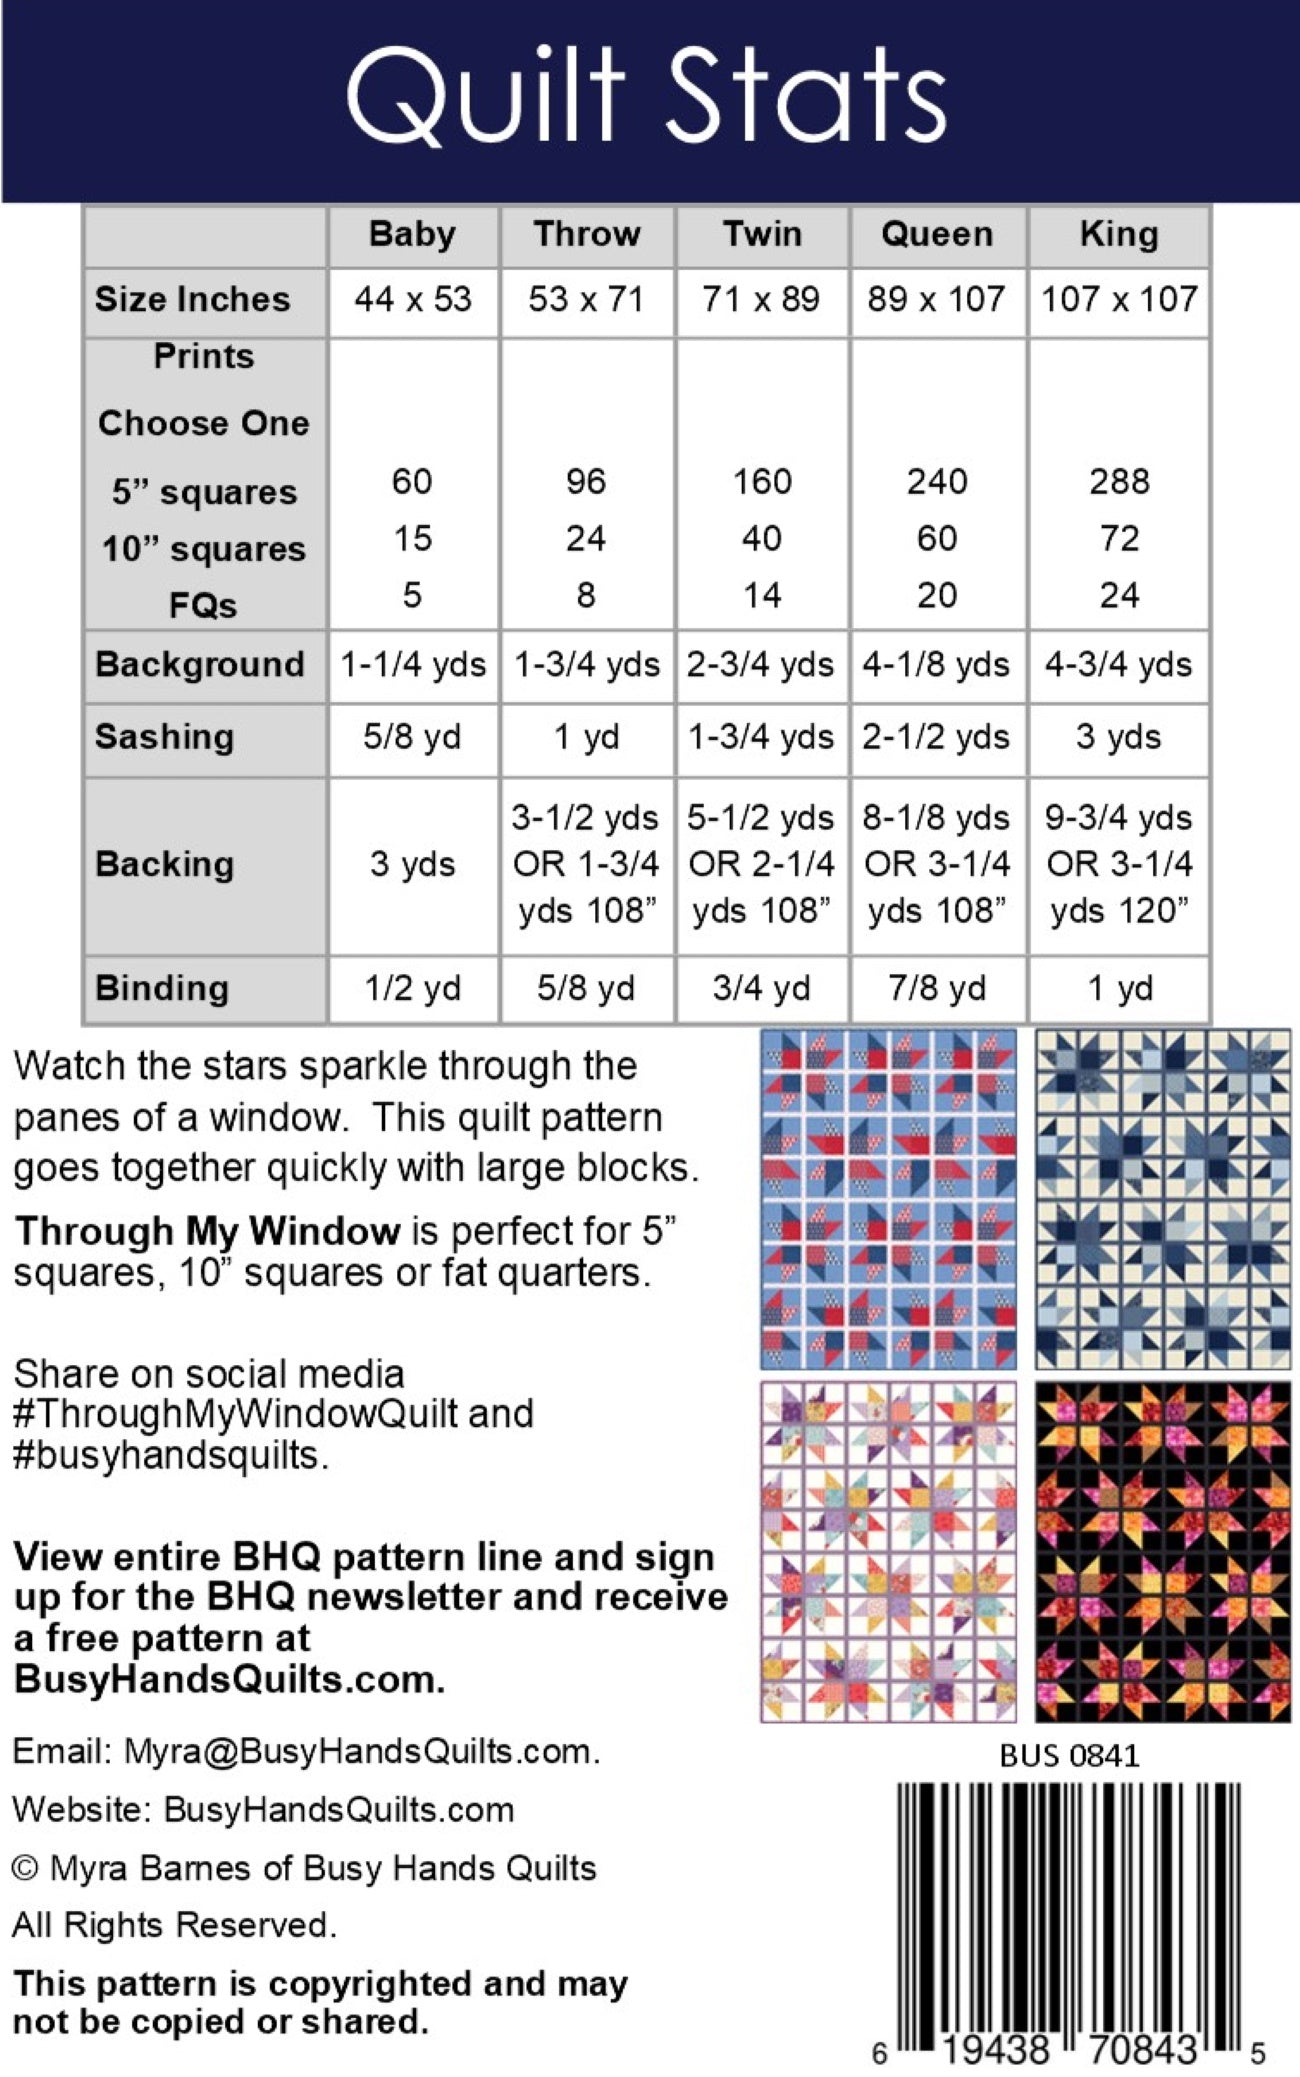 Through My Window Quilt Pattern PRINTED Busy Hands Quilts {$price}